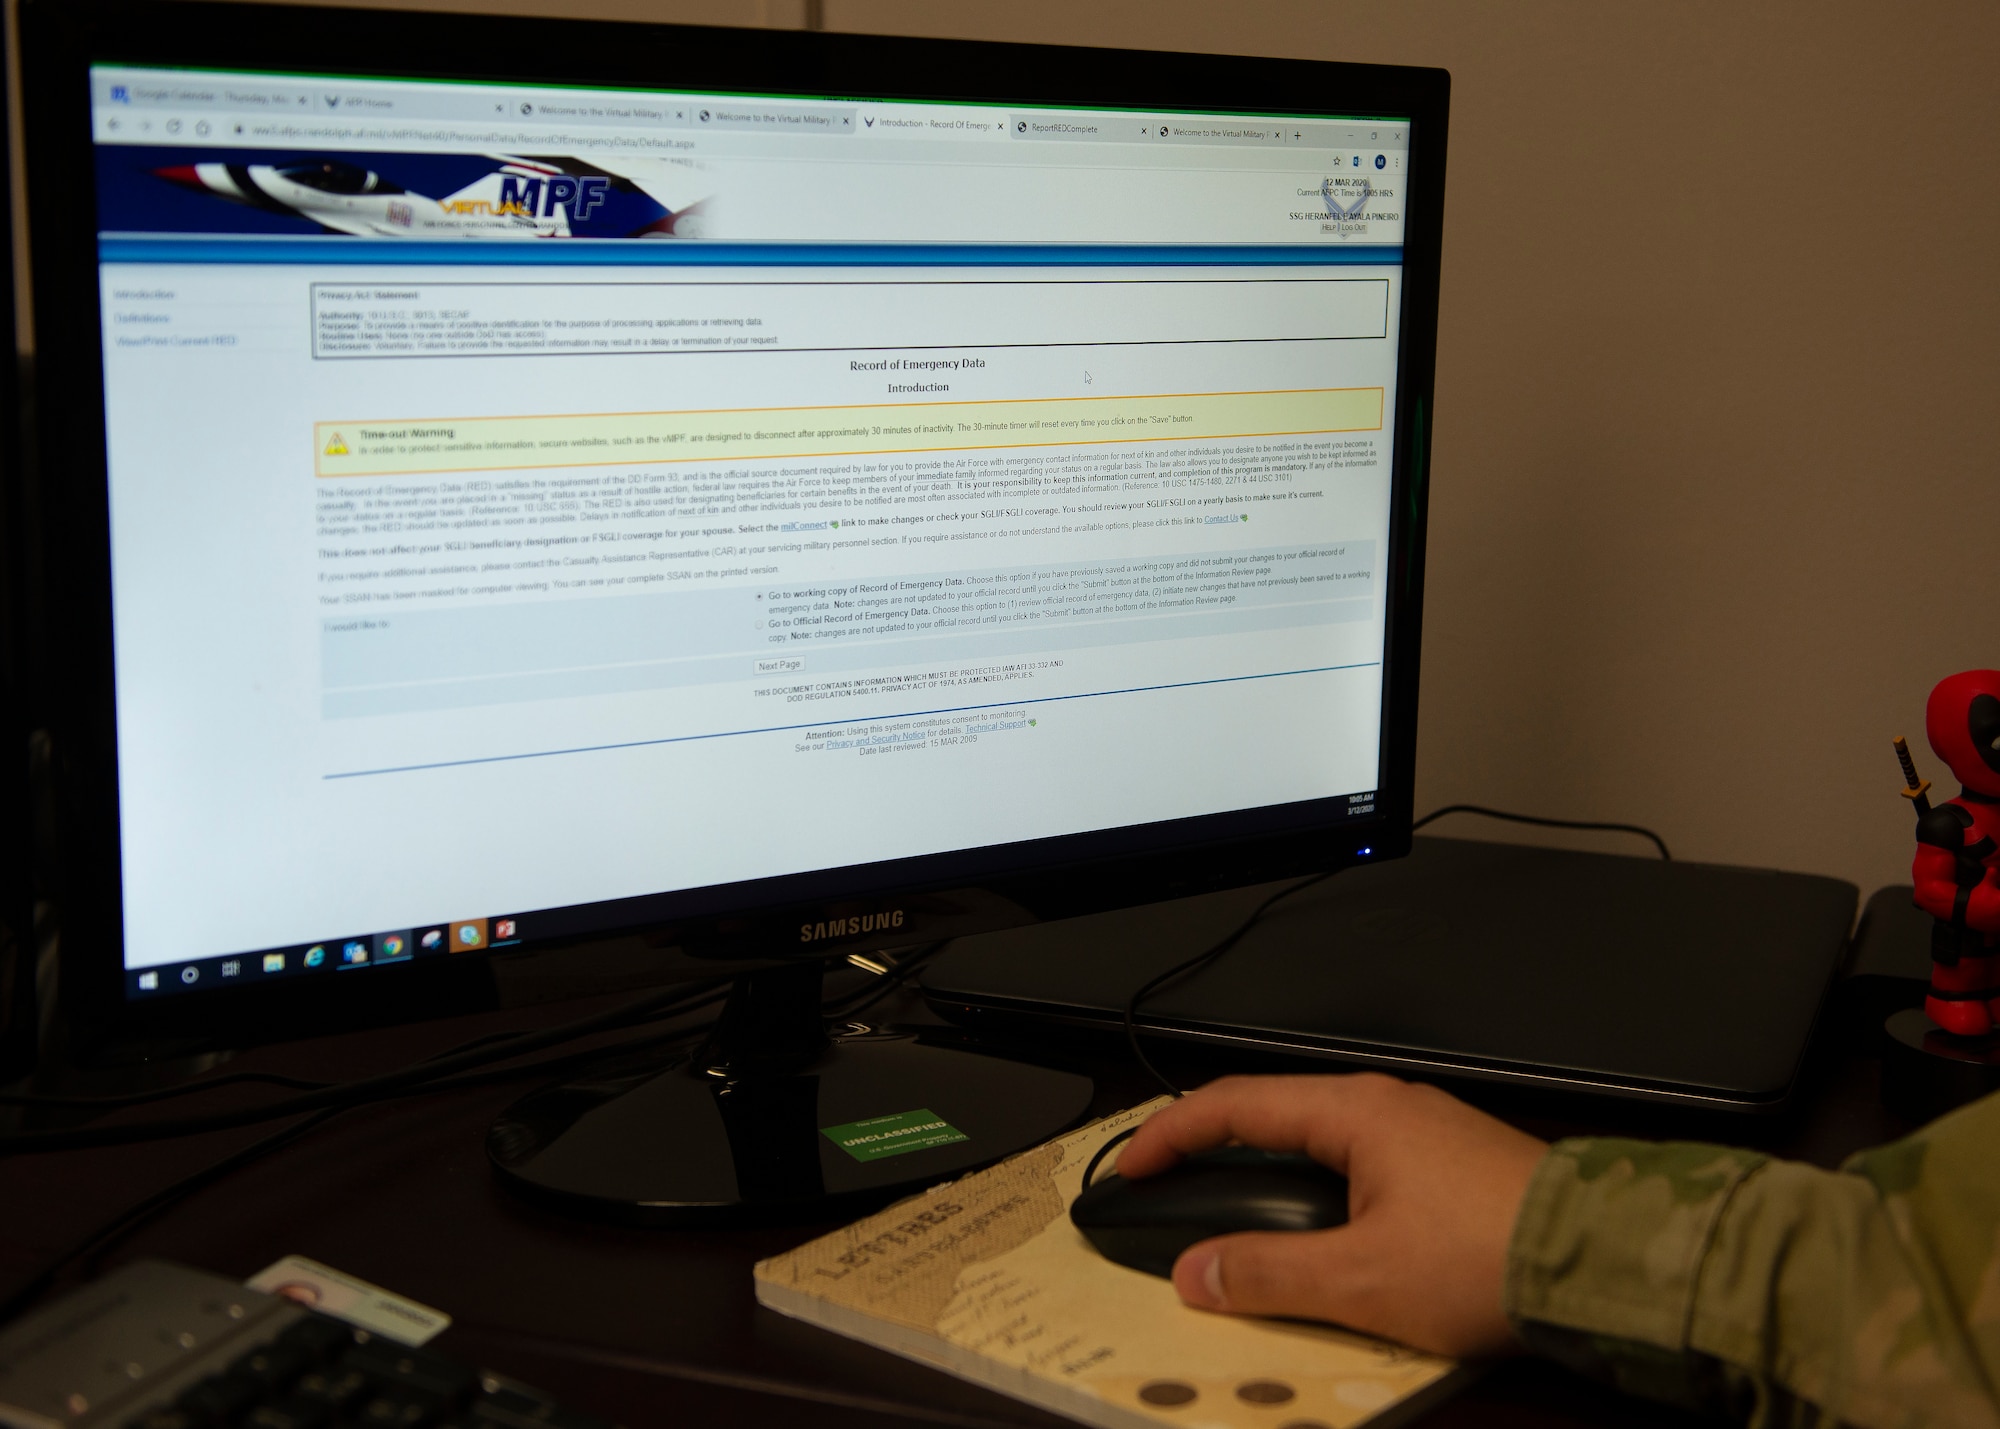 image of airman's hand on computer mouse in foreground with computer screen image on the record of emergency data introduction page